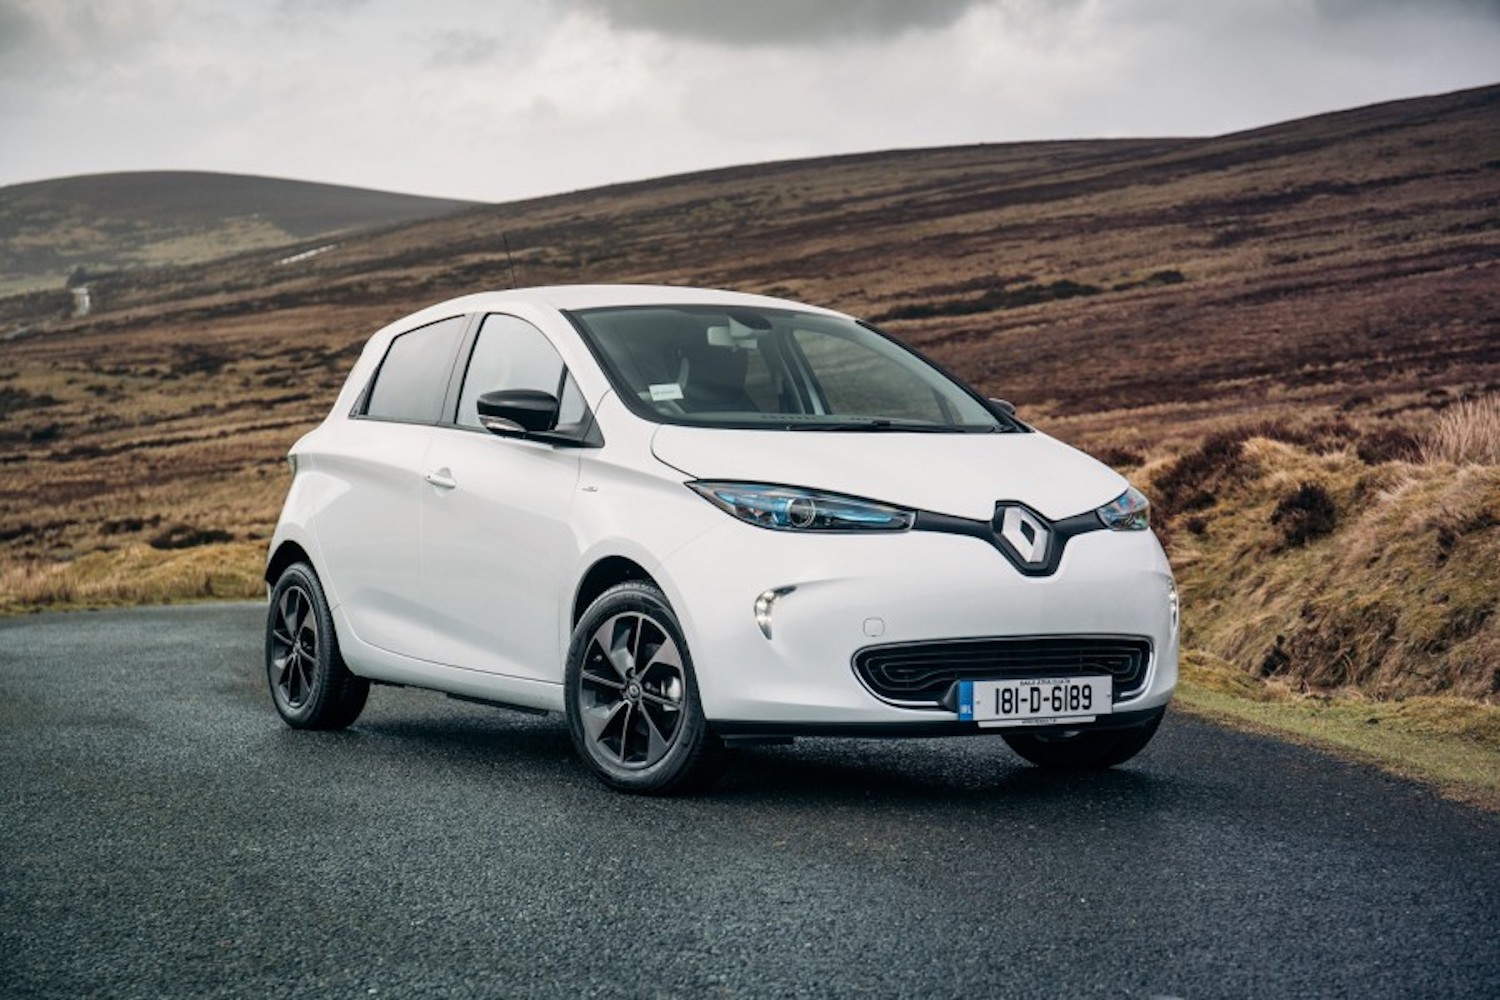 Buying a second-hand electric car